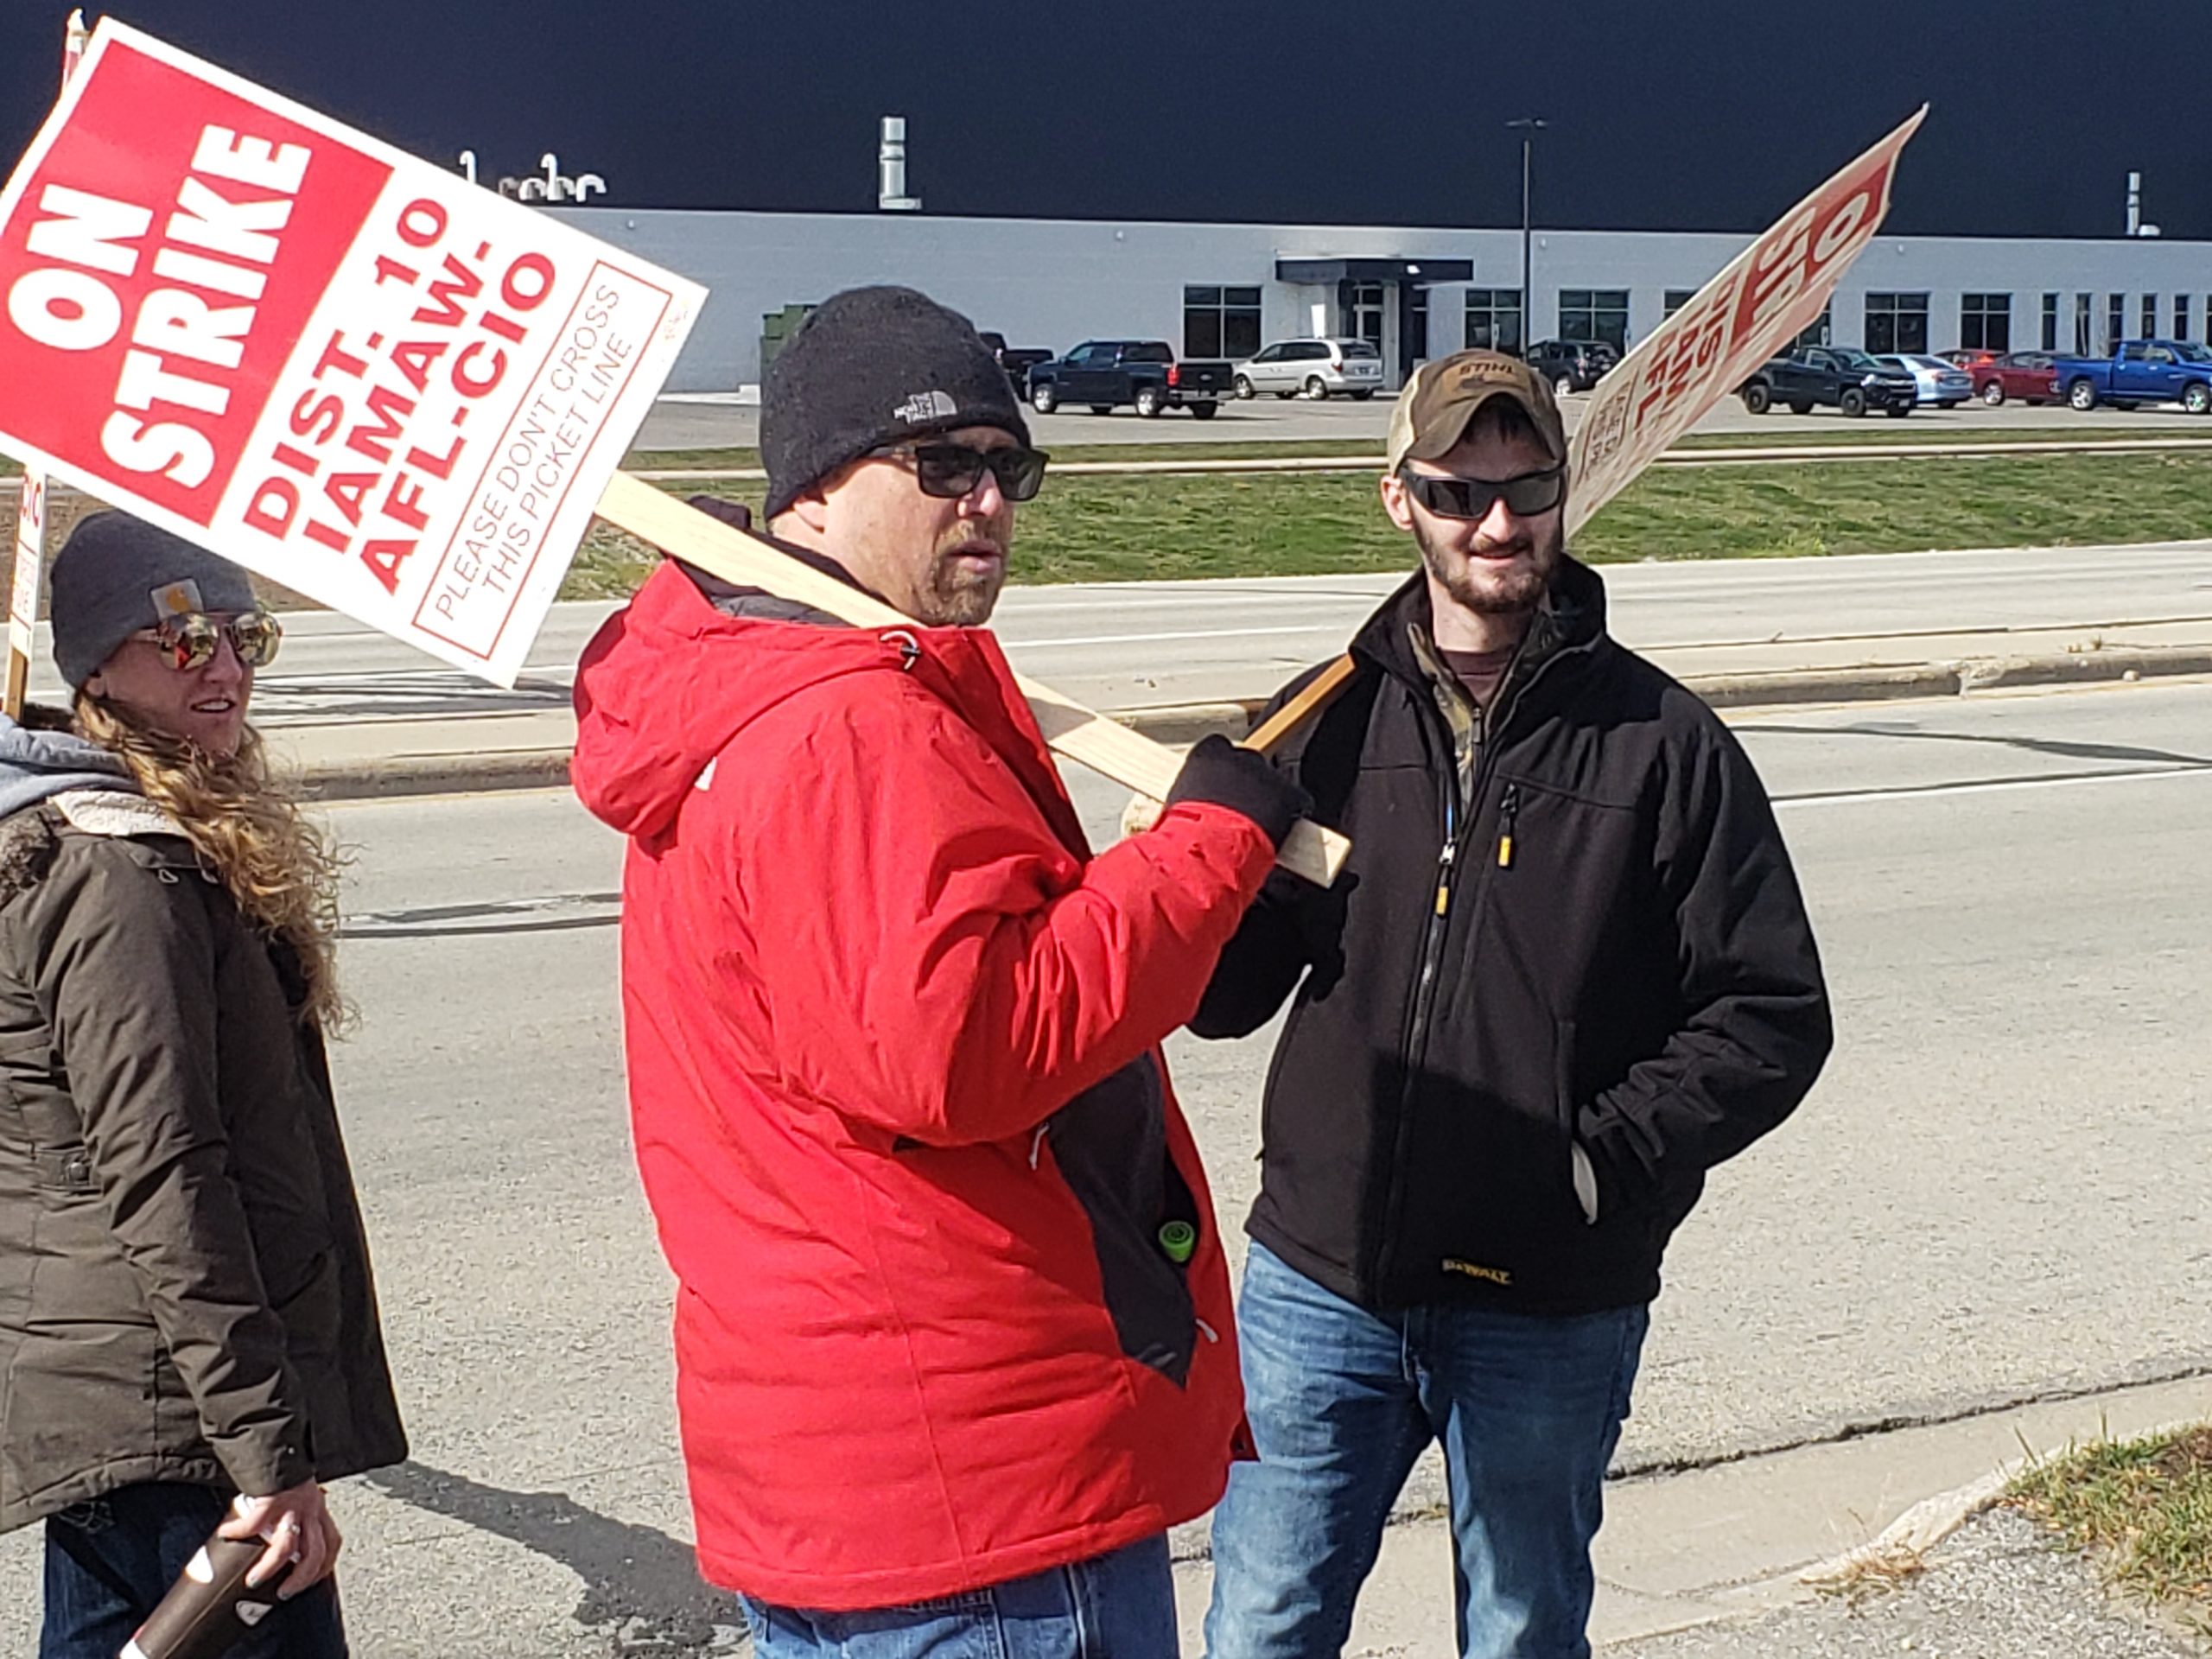 Machinists Union Strikes for Fair Contract at AstenJohnson in Appleton, Wis.